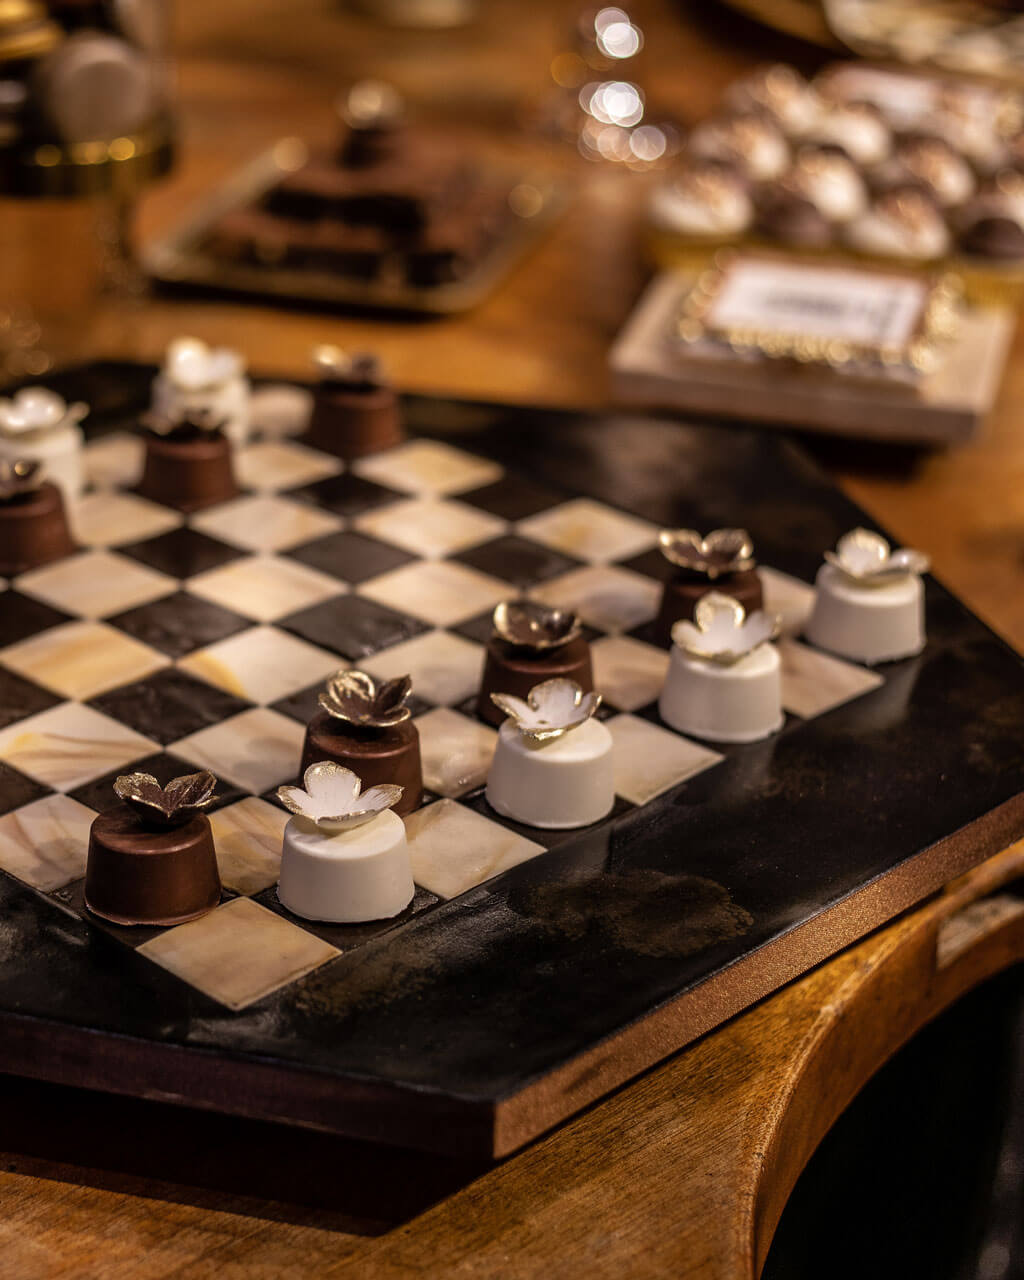 chess board on a desert station made out of cake